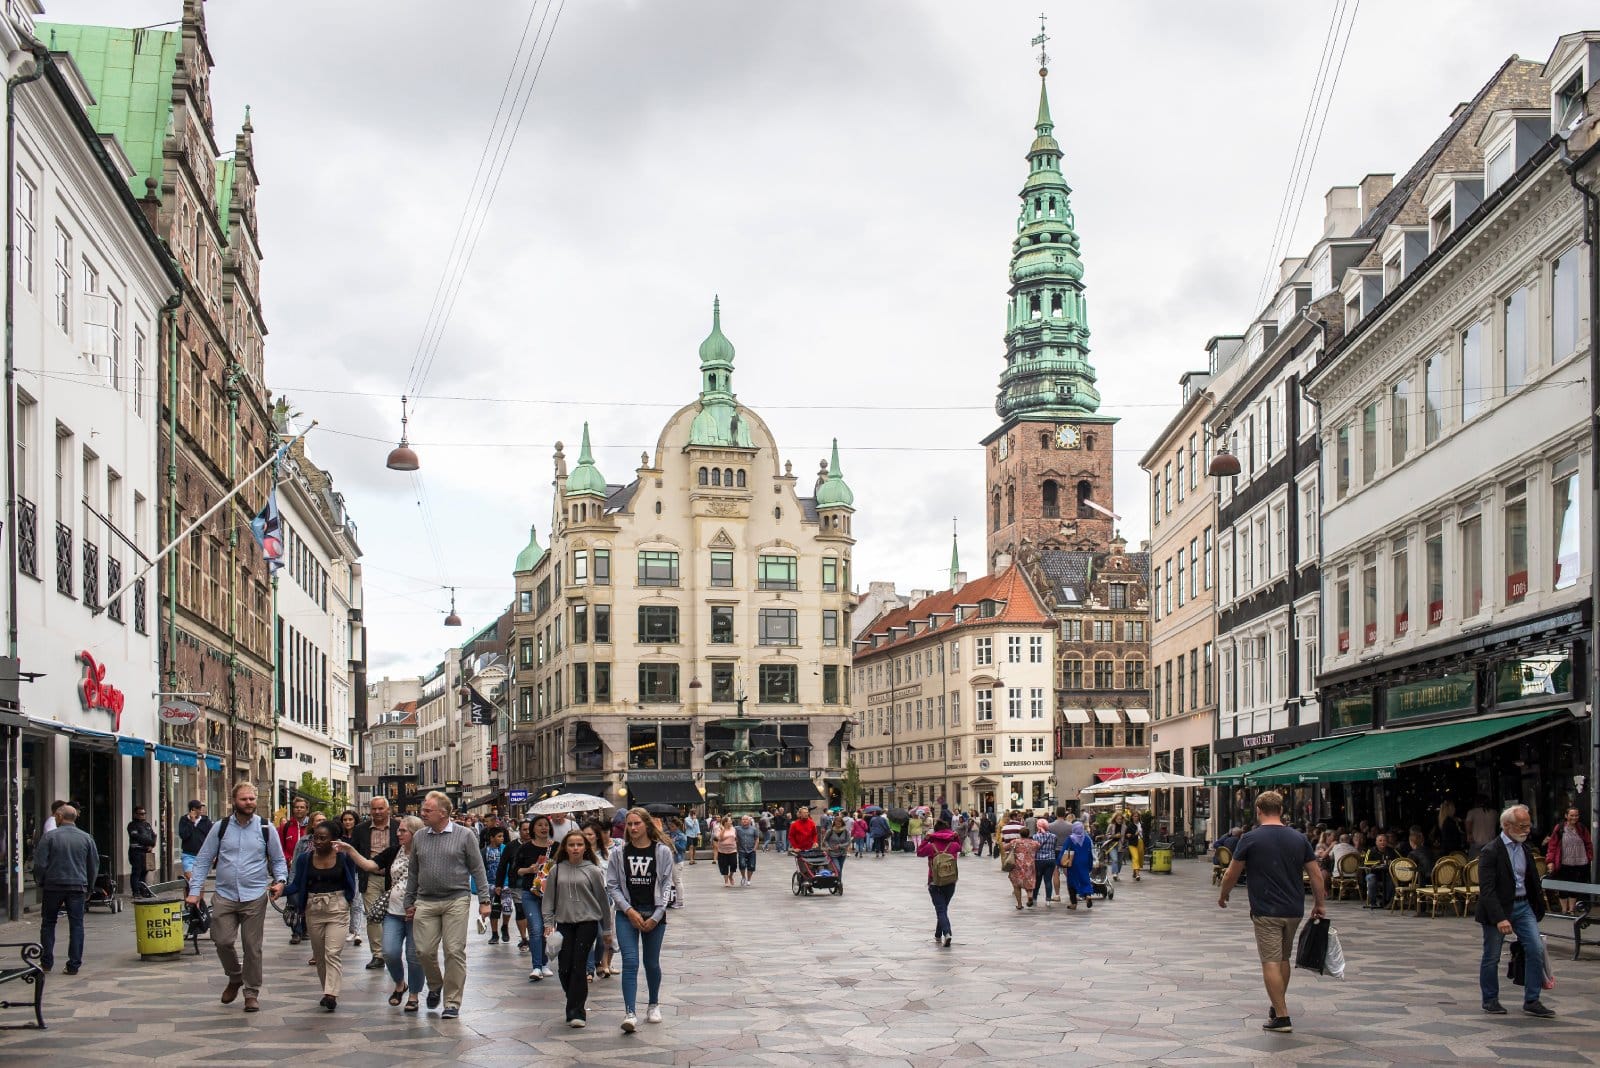 <p class="wp-caption-text">Image Credit: Shutterstock / trezordia</p>  <p>Set up your stage in the colorful Nyhavn district or entertain passersby in the vibrant Strøget shopping street.</p>